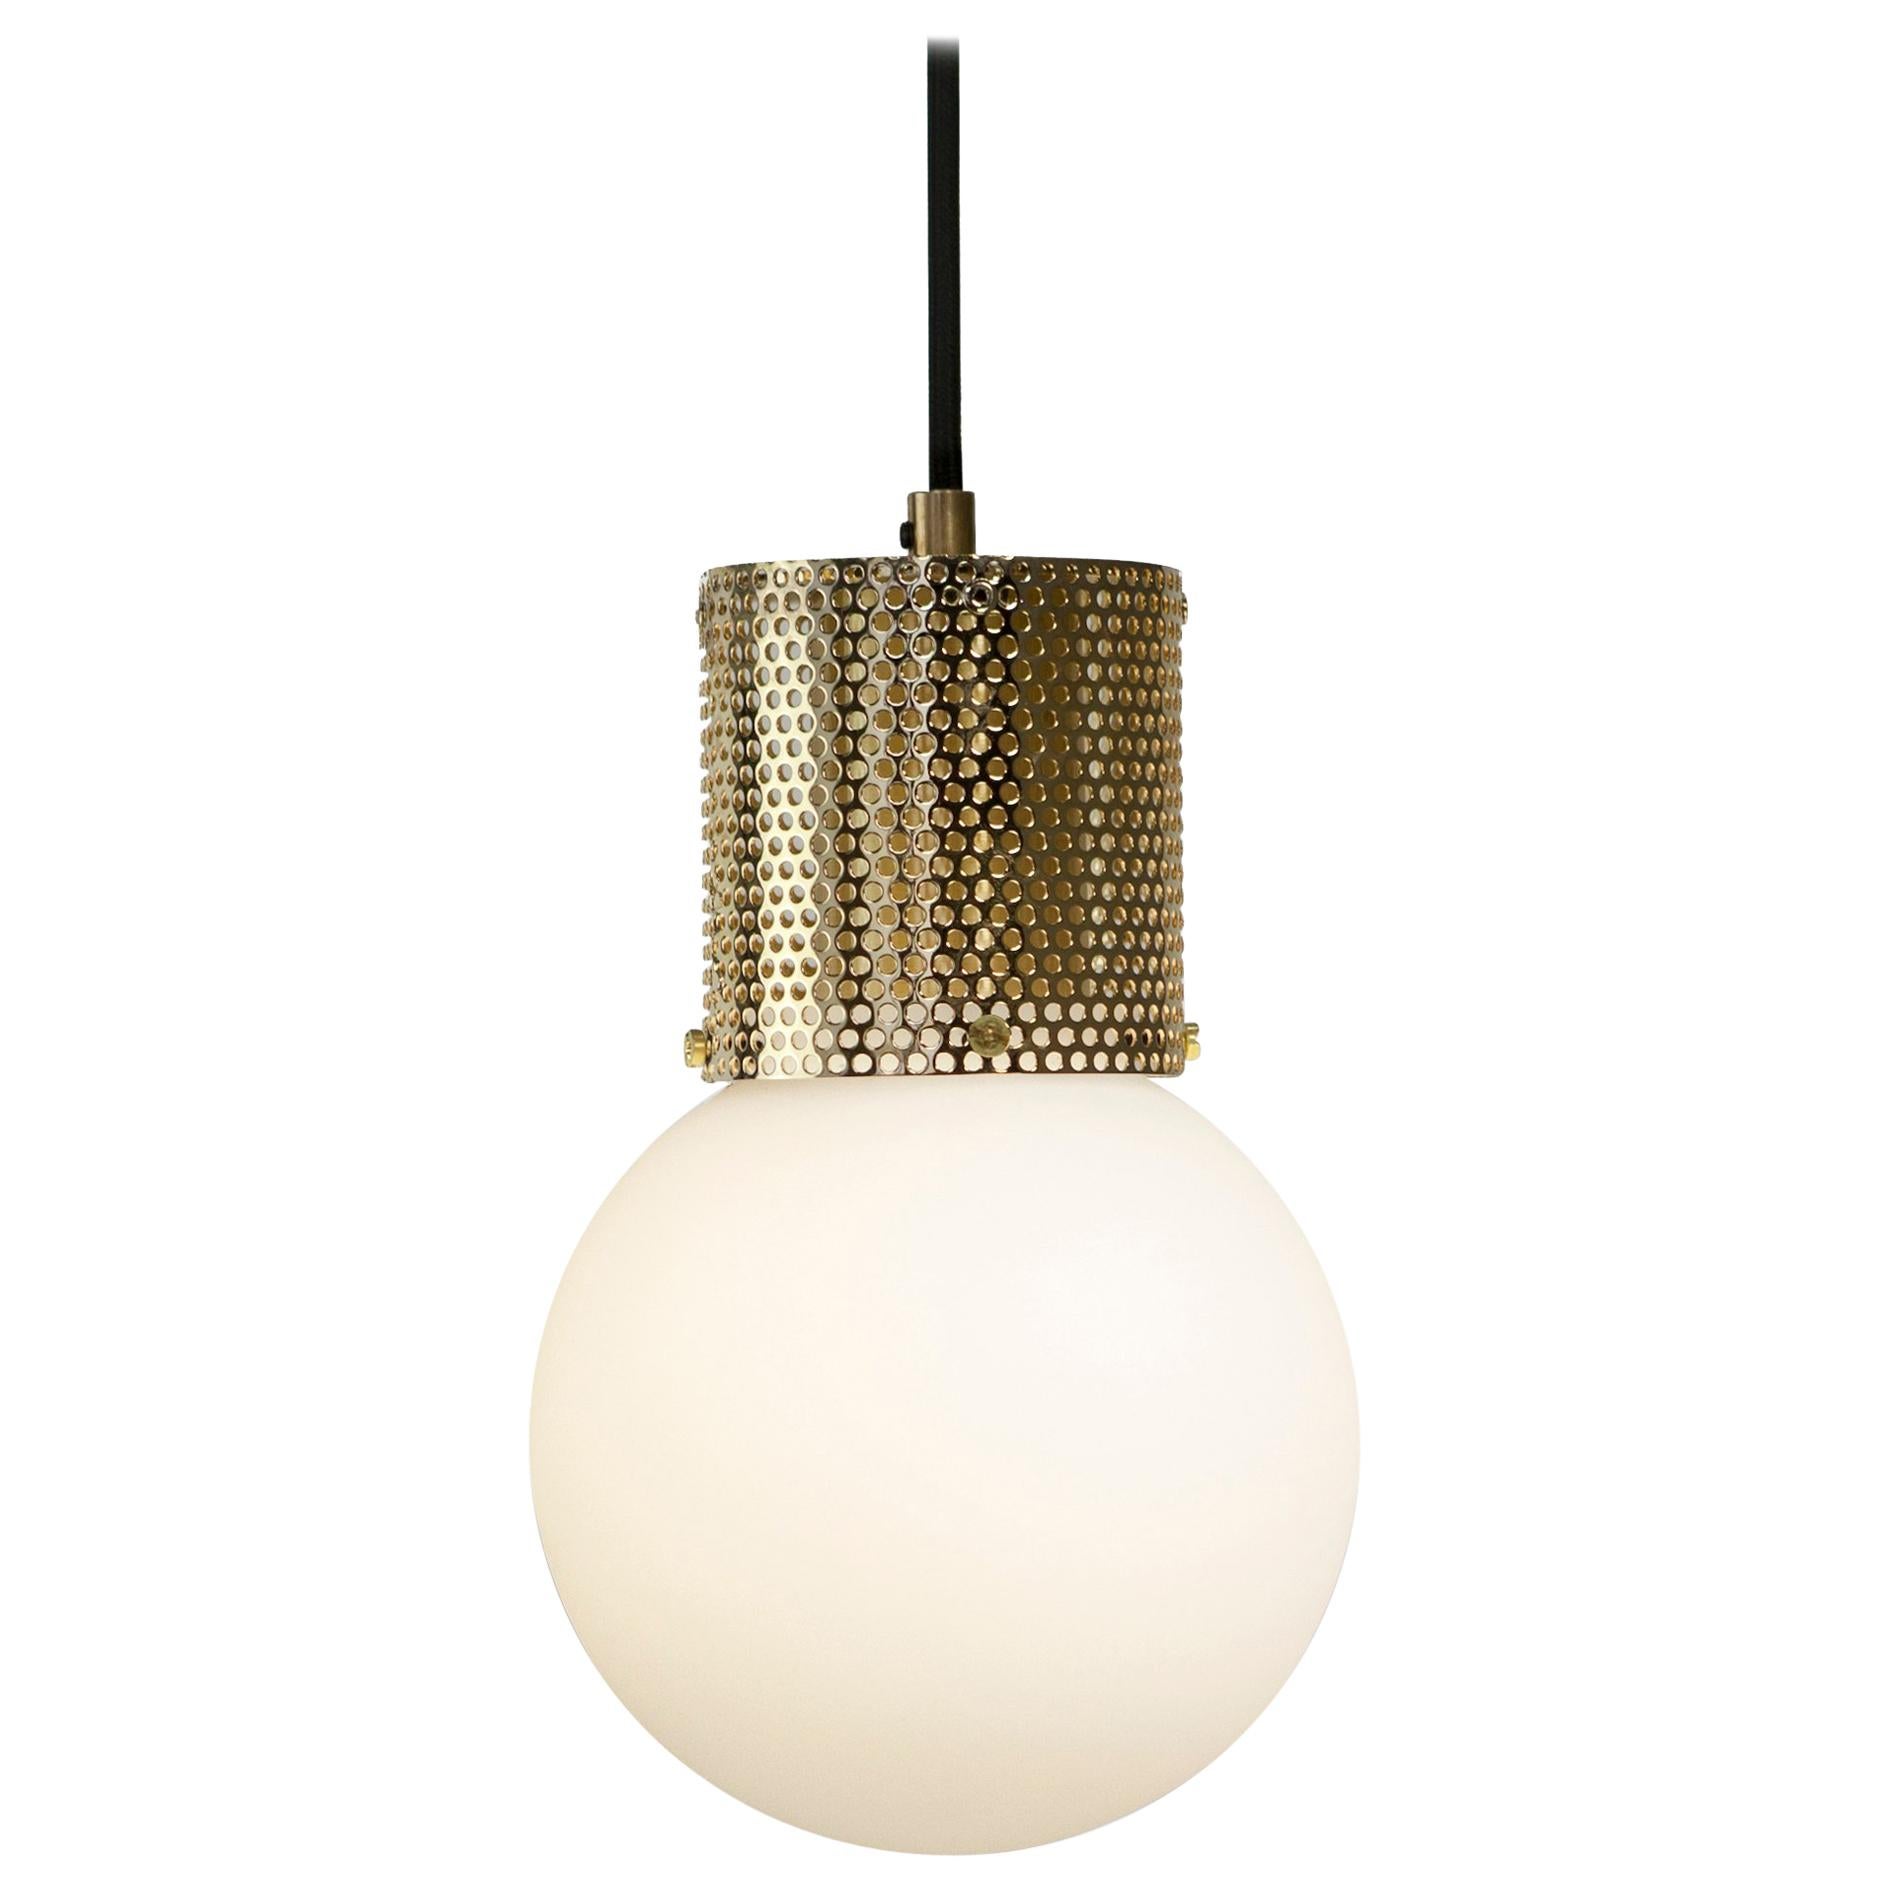 Perf Pendant Light, Small- Brass Perforated Tube, Glass Round Orb Shade For Sale